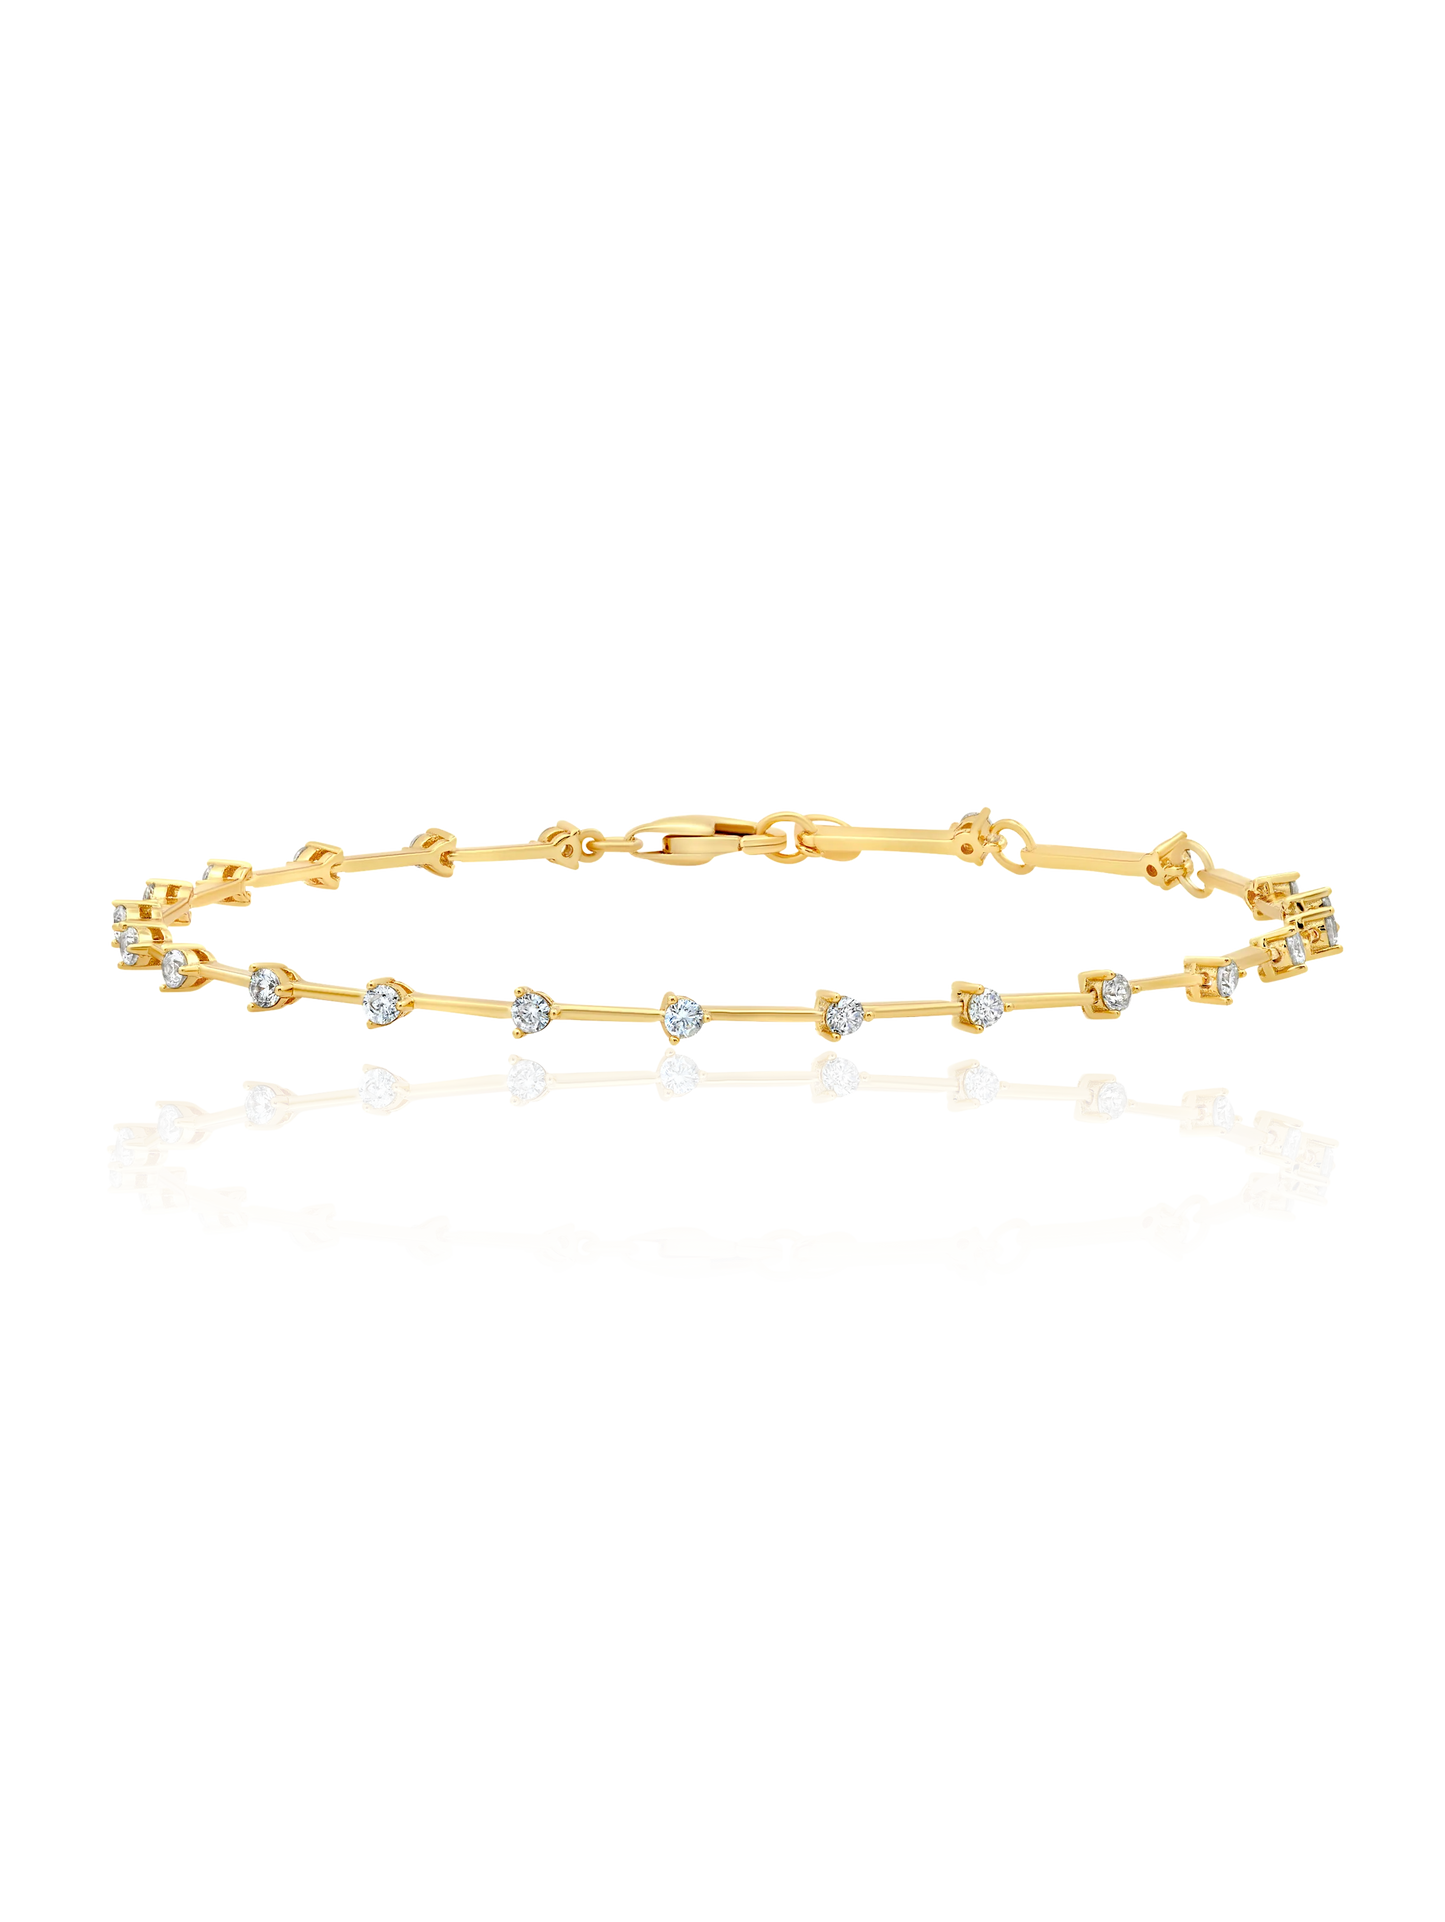 Bar Bracelet with Repeating 2mm Stones